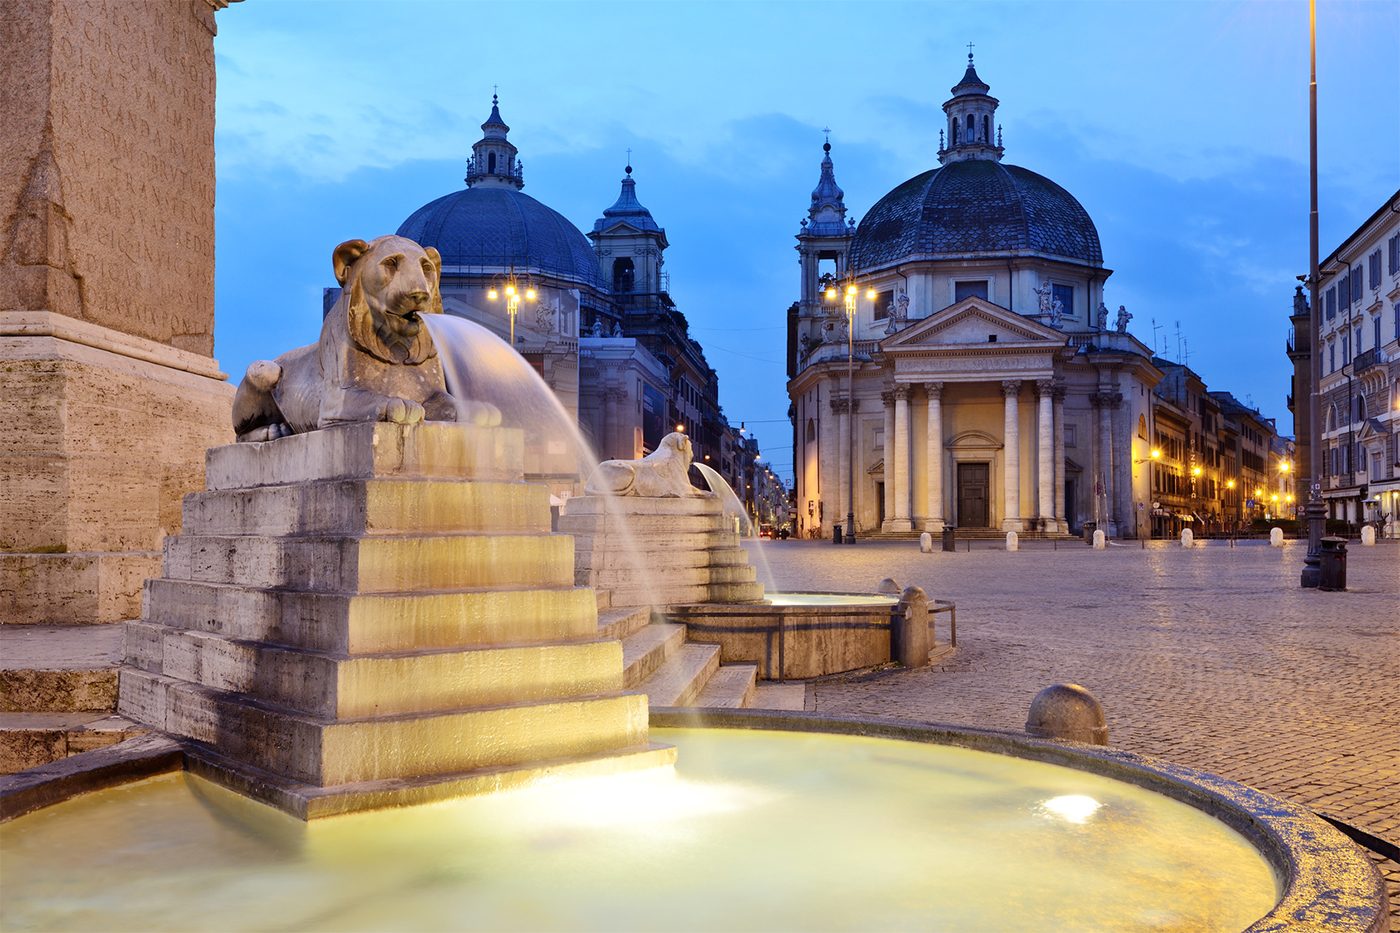 Piazza del Popolo - Particular of the basins with lions